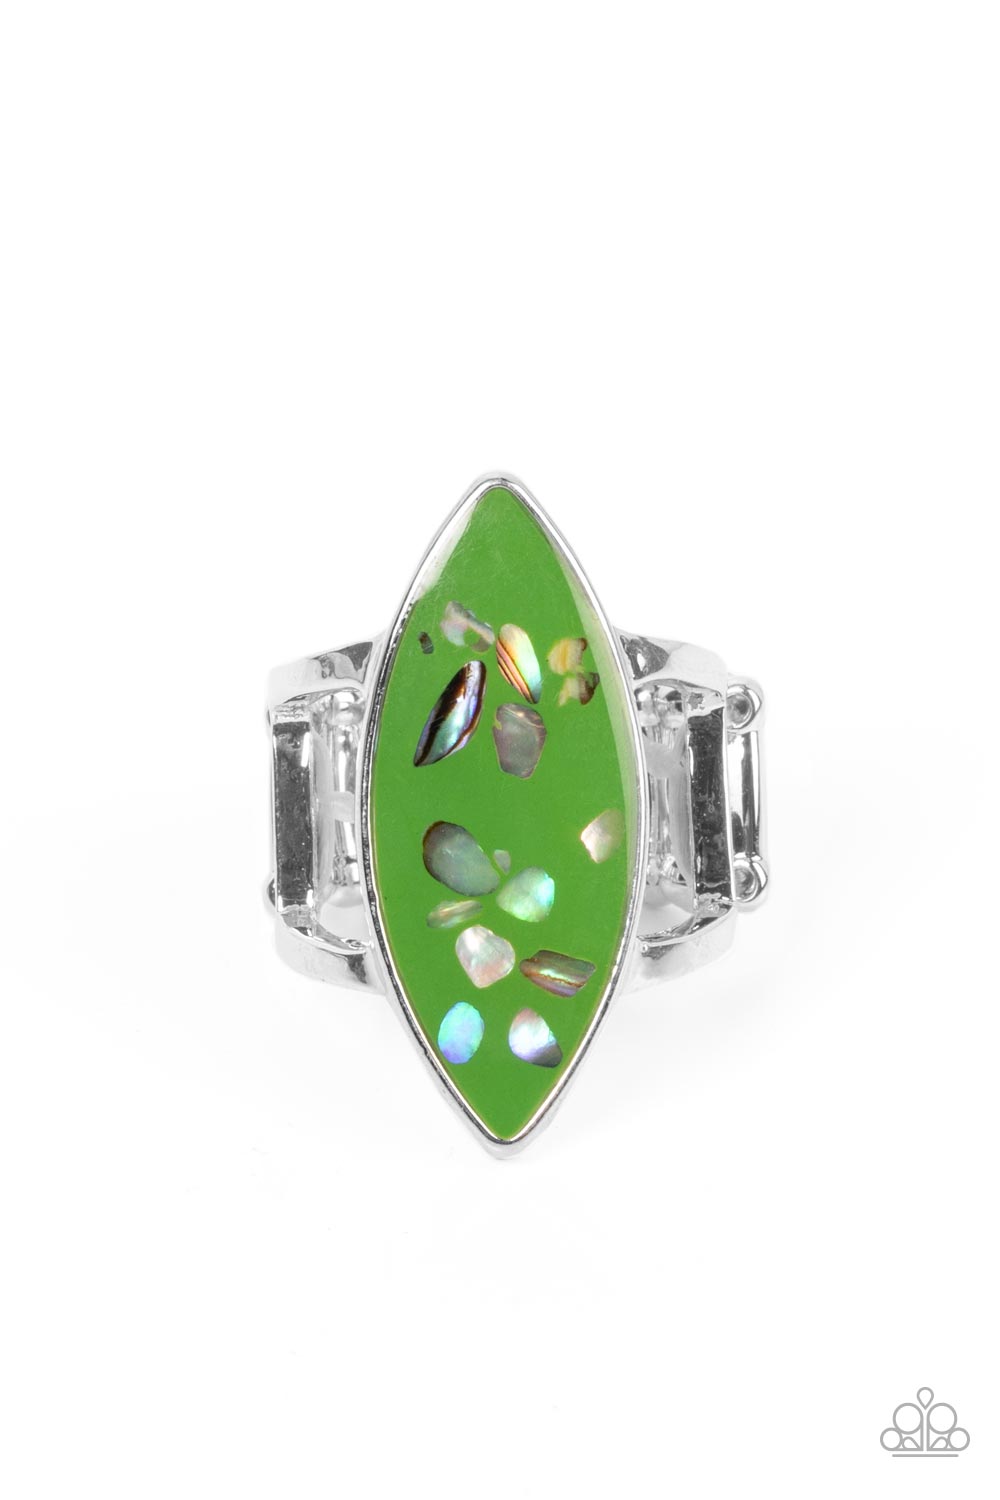 paparazzi-accessories-oceanic-odyssey-green-ring